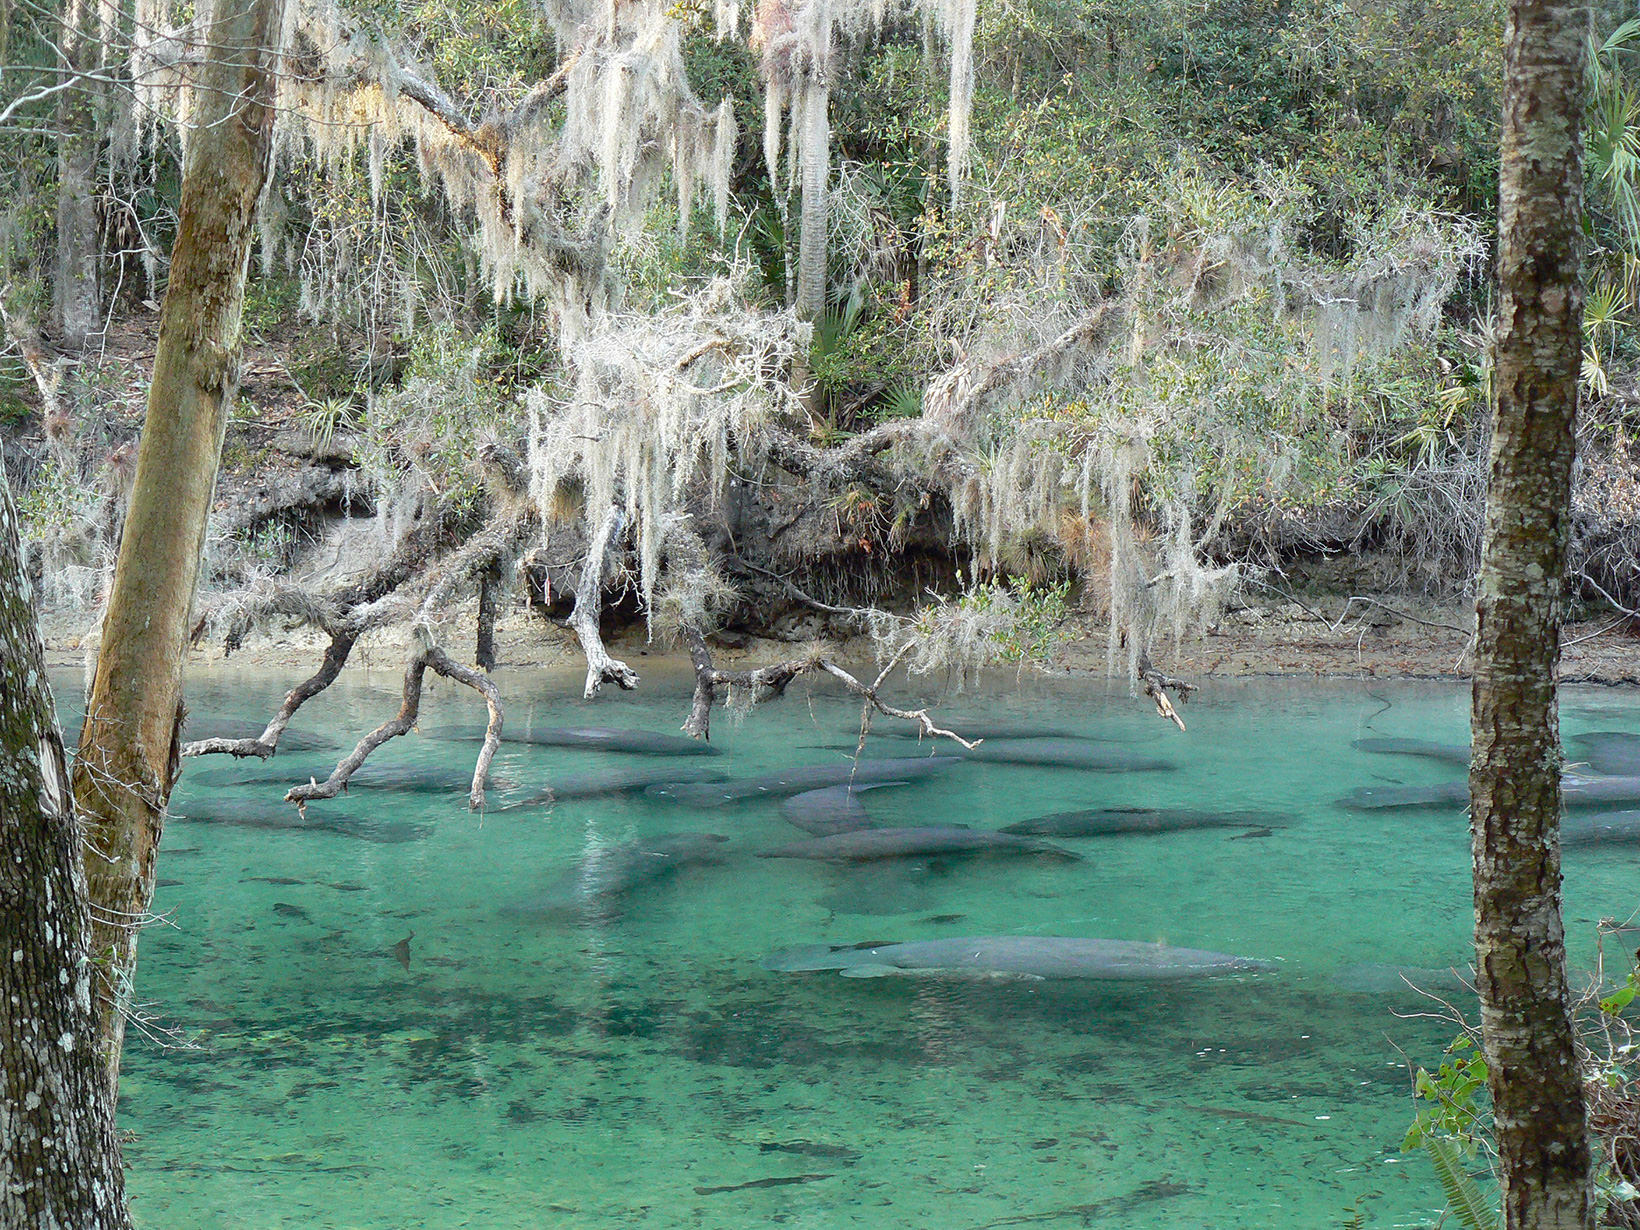 Group of manitees swim in clear, turquoise-hued water under branches draped with moss.